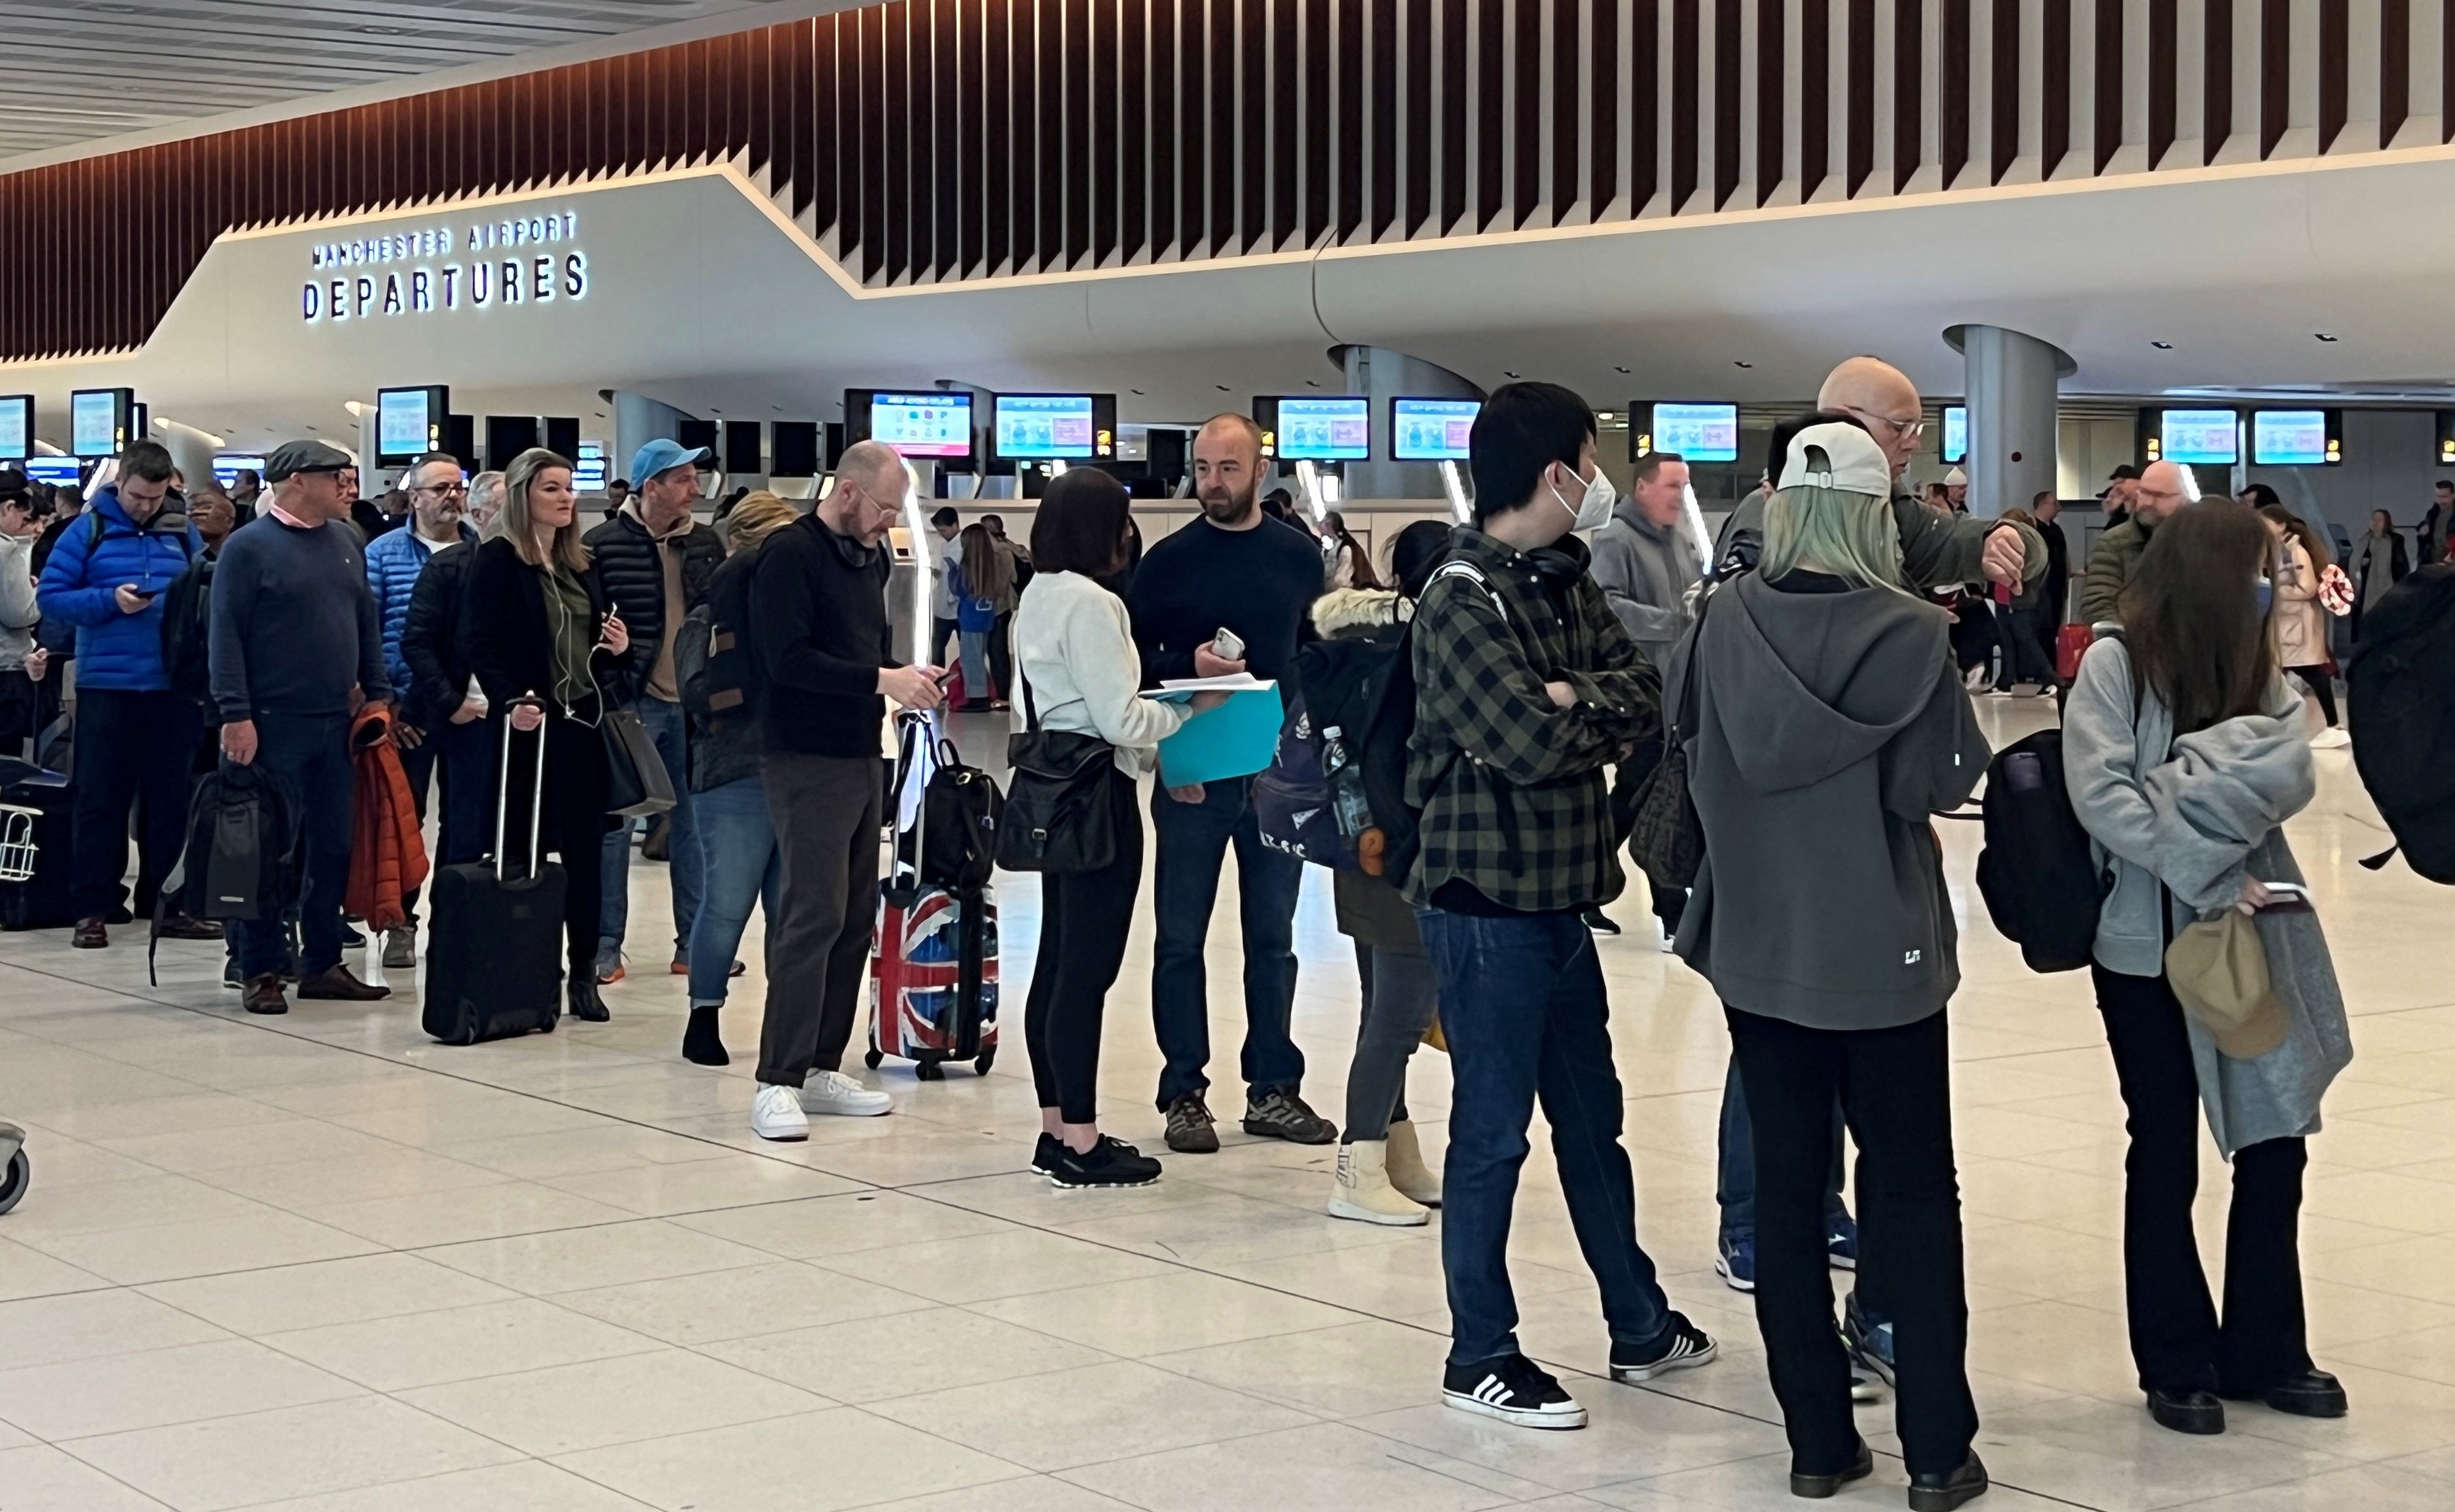 Passengers queue for security screening in the departures area of Terminal 2 at Manchester airport